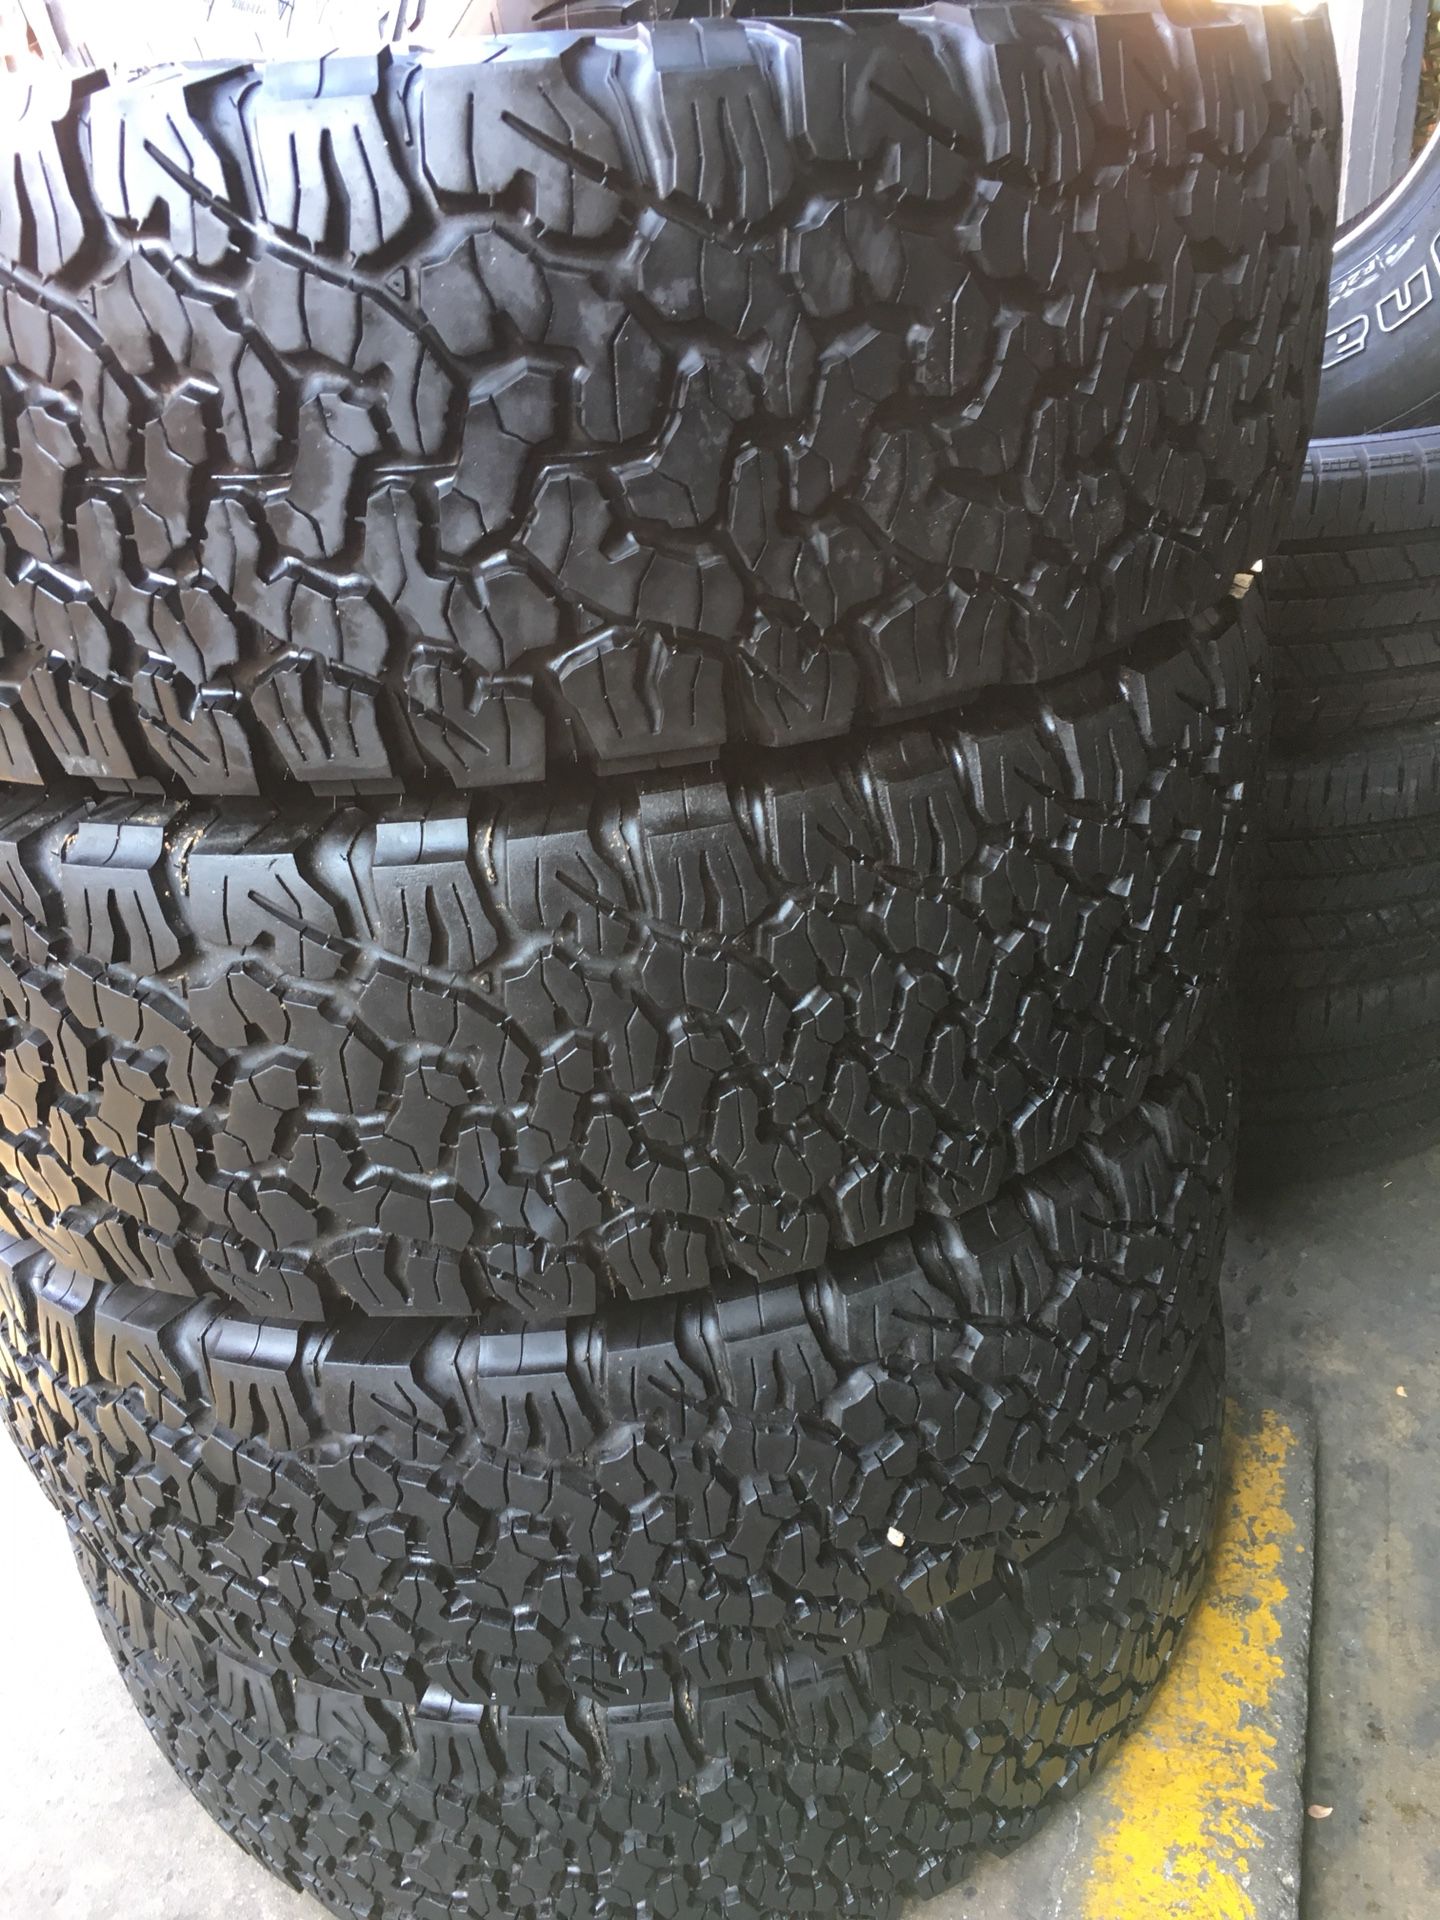 Set 5 Tires 275 70r18 Bfgoodrich Ko2 Used Like New For Sale In Los Angeles Ca Offerup